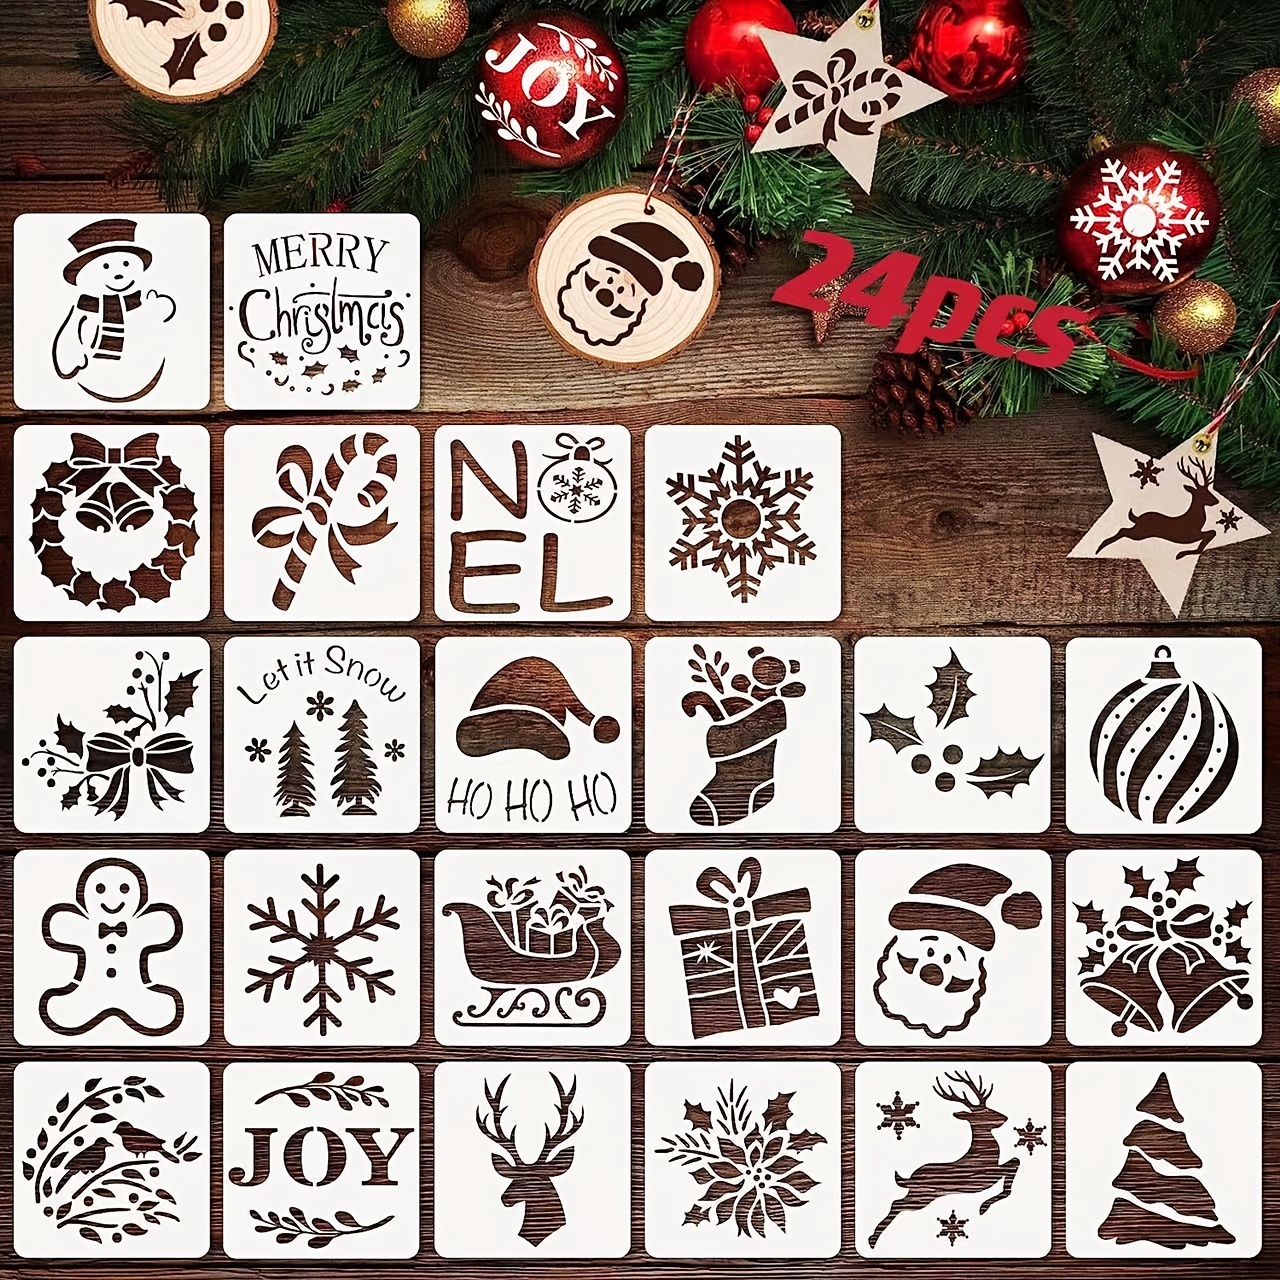  Small Christmas Stencils for Painting on Wood Reusable Round  Small Holiday Merry Christmas Stencils Xmas Ornaments Stencil for Wood  Slice Cards Scrapbook Journal Cookie Glass (12pcs Words 4in Round) 